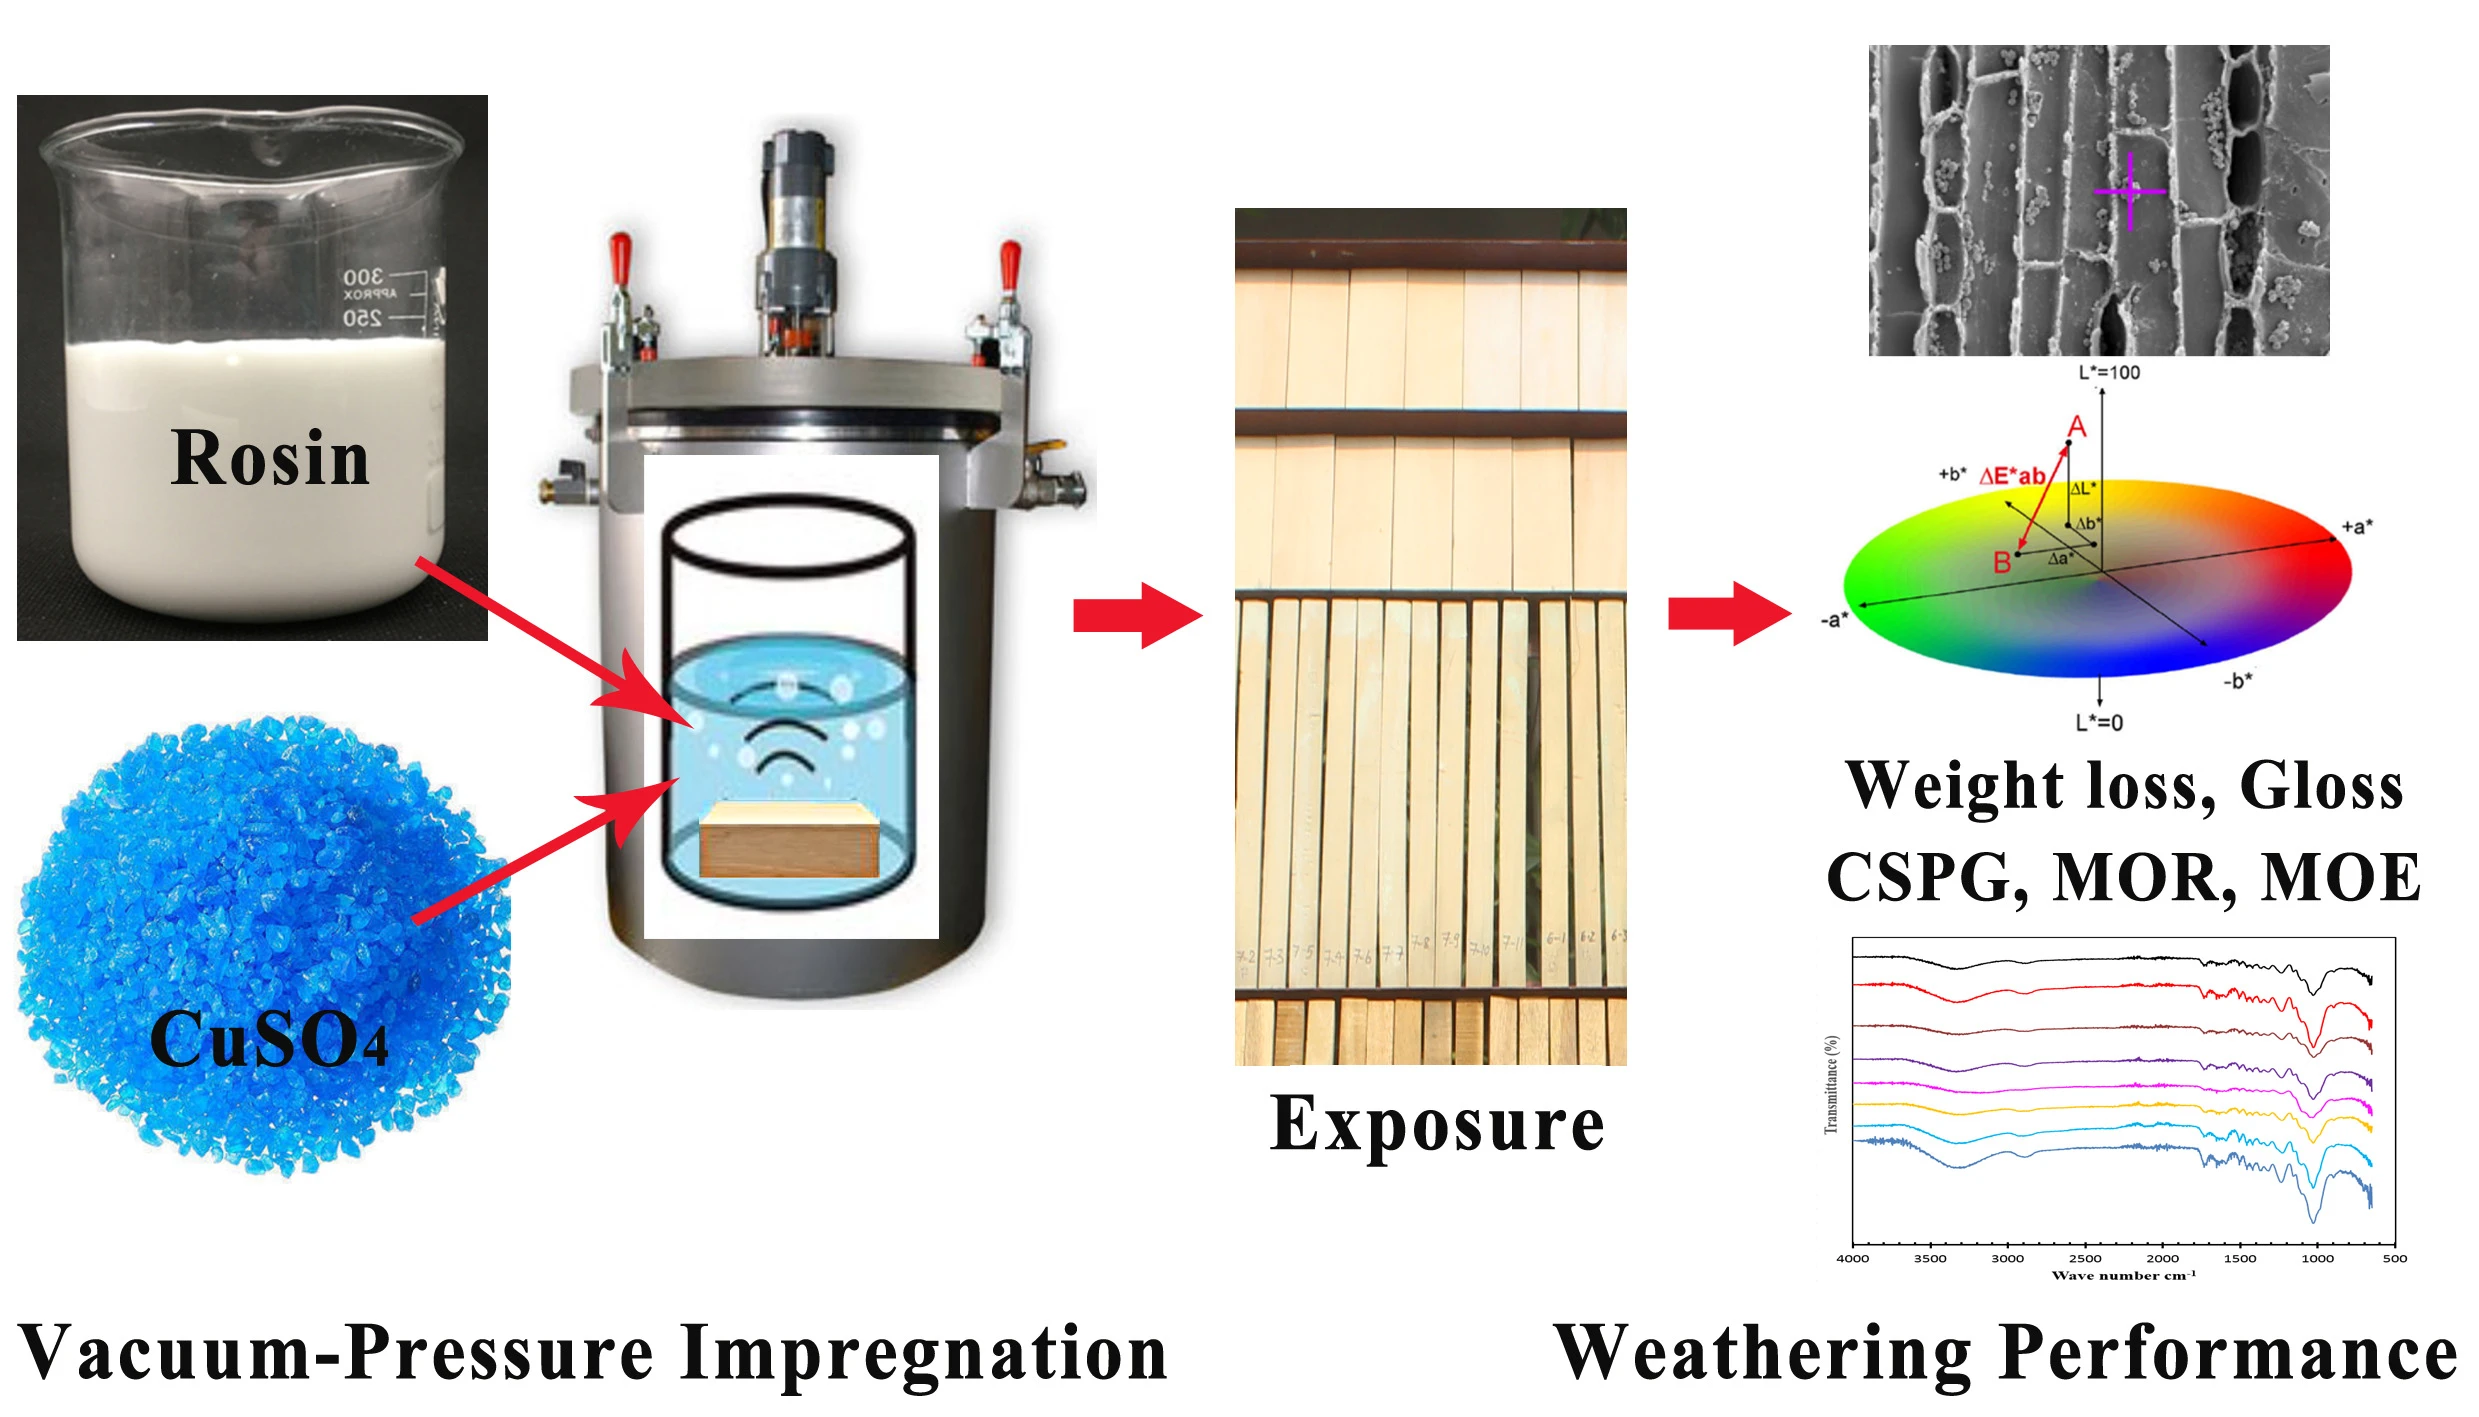 Evaluation of Weathering Performance of Rosin-Copper Based Treated Wood